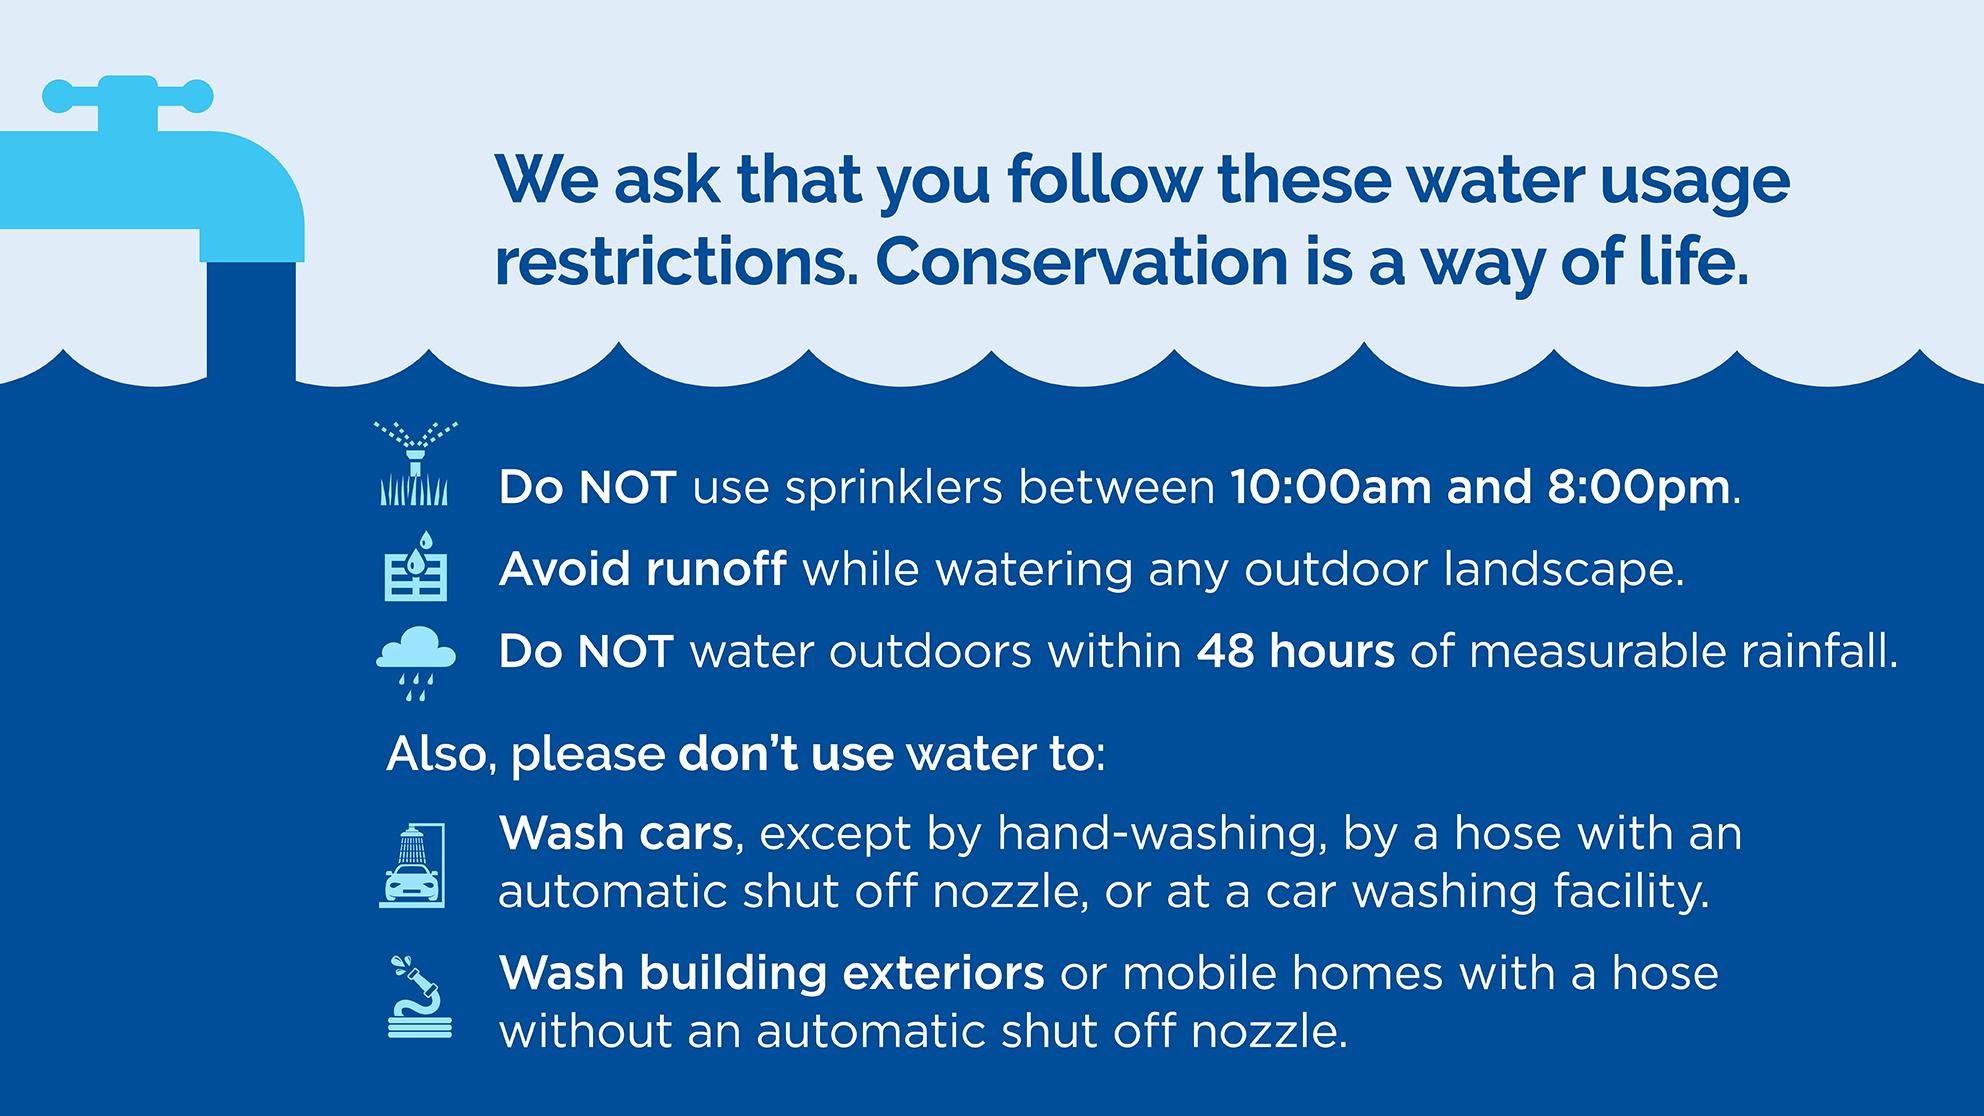 List of water use restrictions including no sprinklers between 10am-8pm, avoid runoff, don't water within 48 hours of rainfall, take care with car washing, and don't use hoses without automatic shut-off feature.